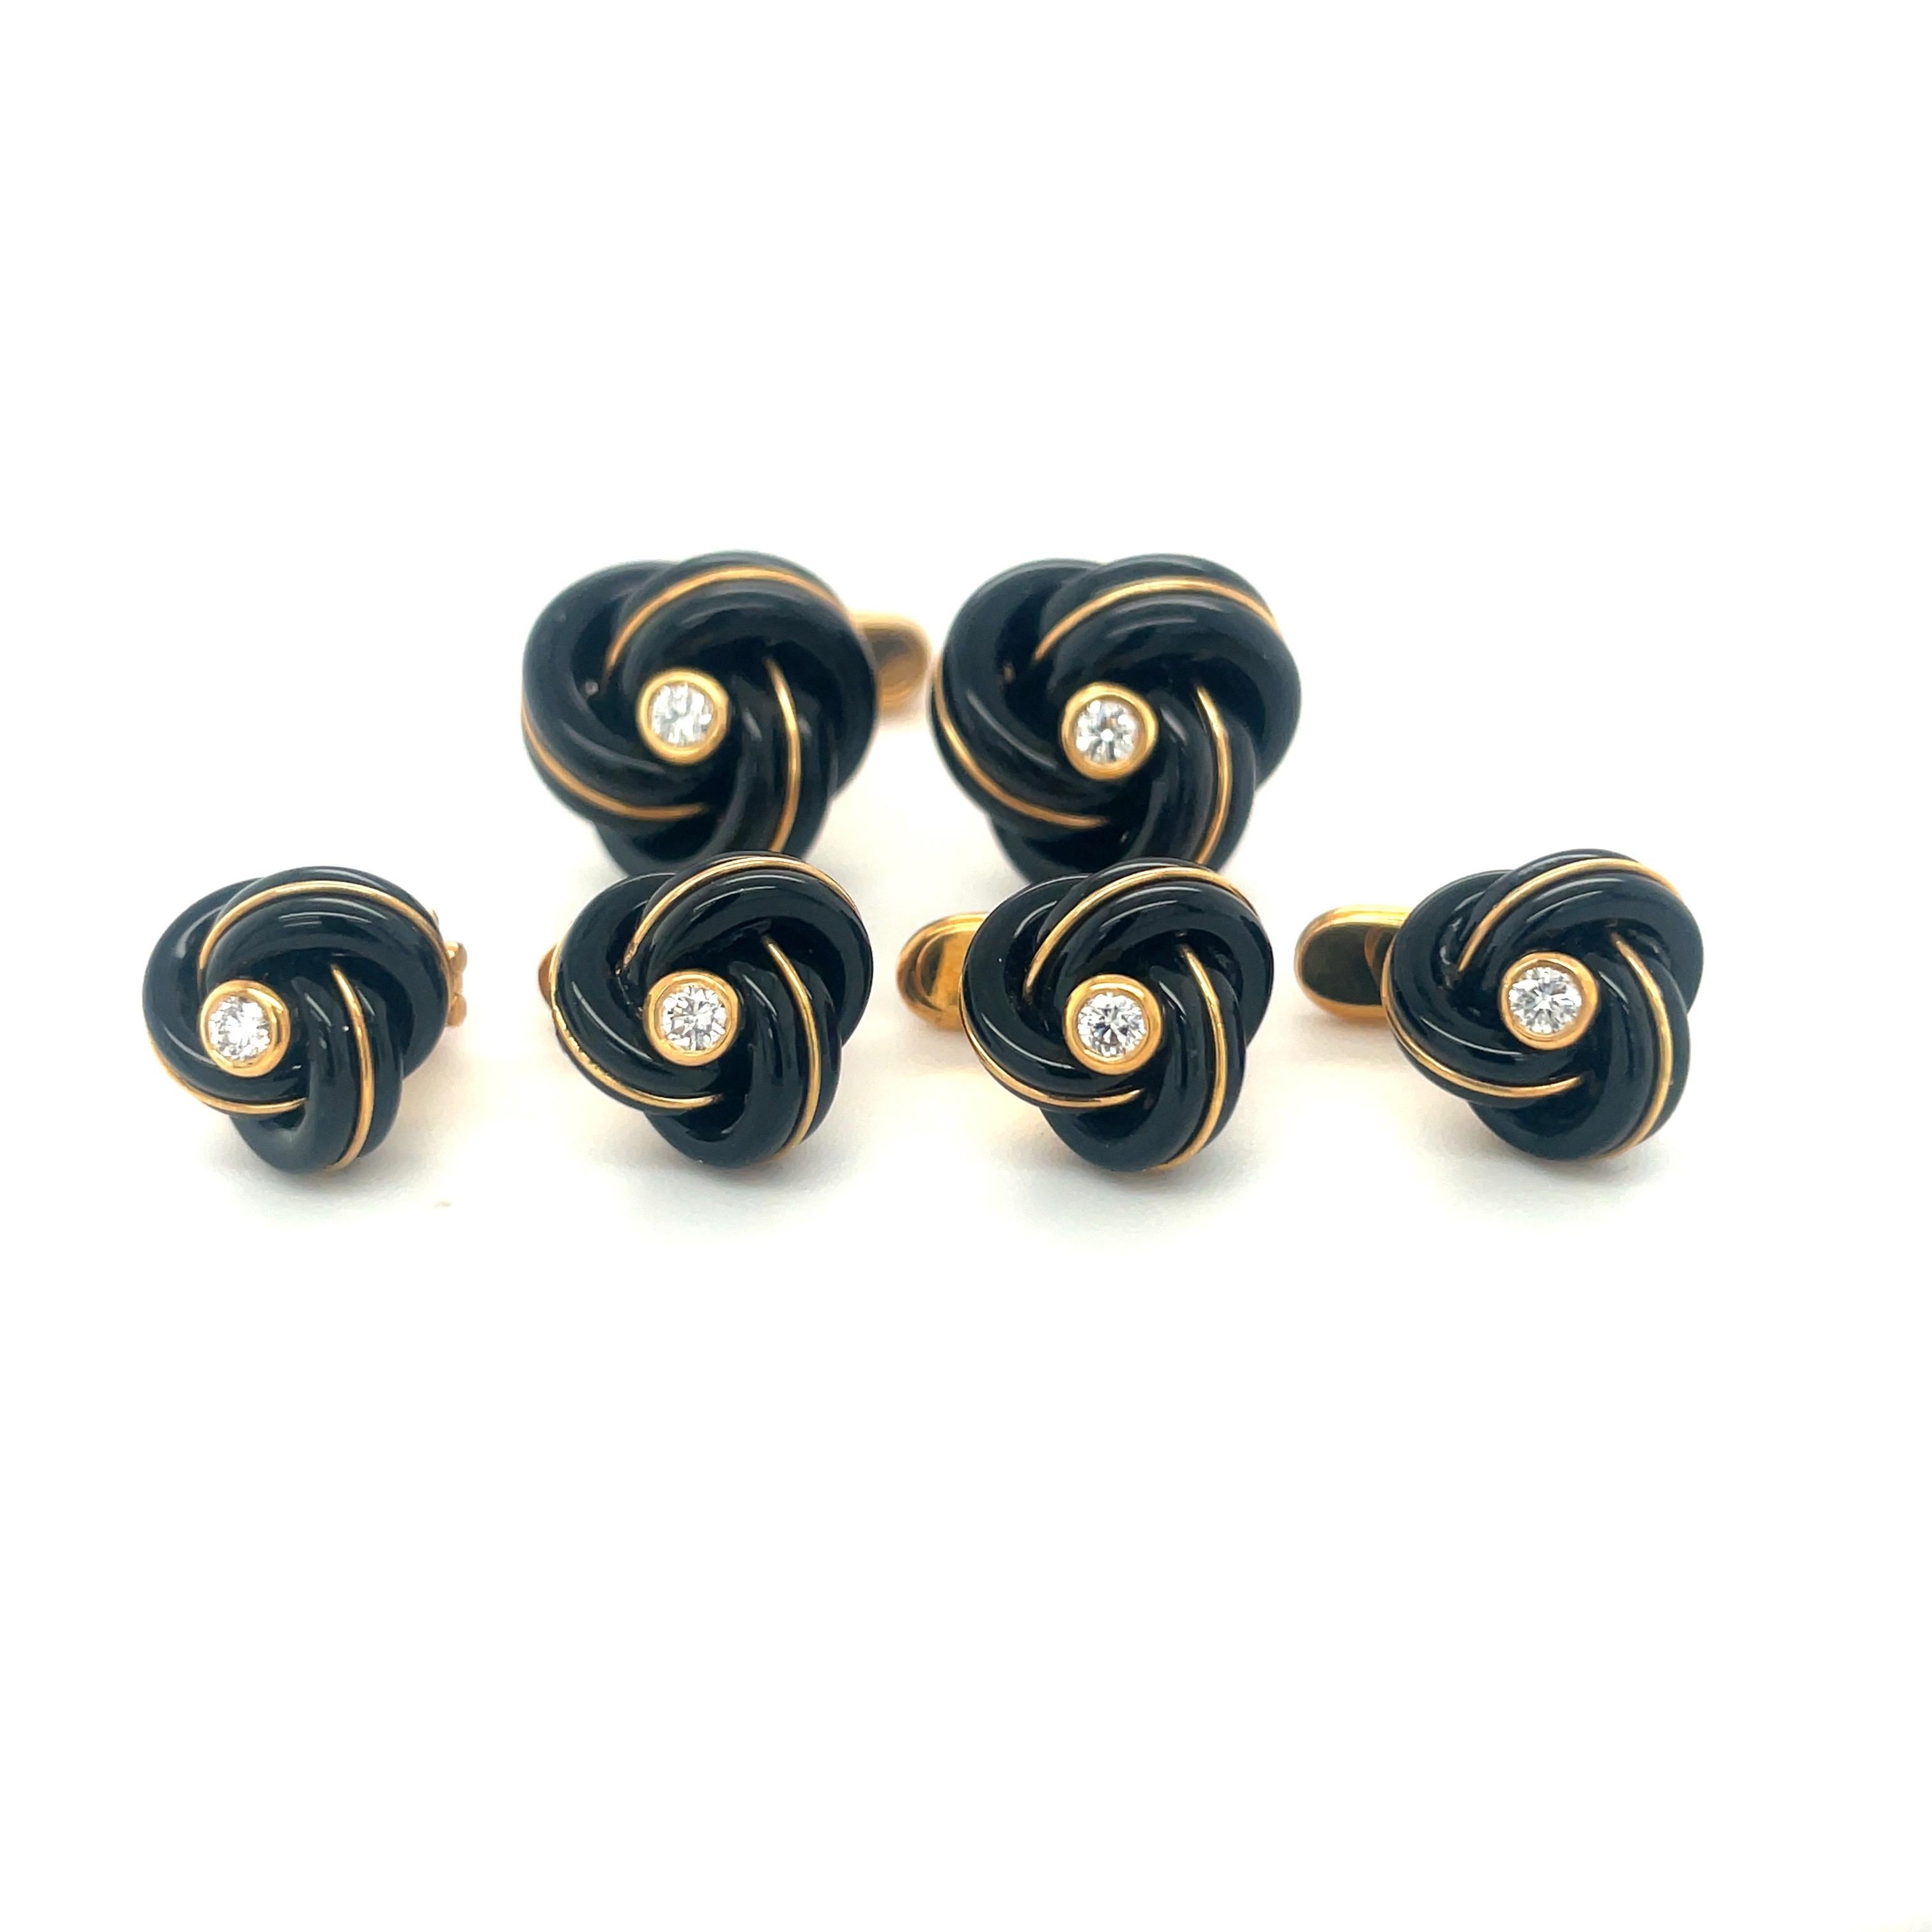 Created by George Gero, renowned worldwide for luxurious men's cuff-links, comes this classic cuff-links /studs dress set in 18 karat yellow gold. The black onyx knot cuff links / studs are detailed with yellow gold and have bezel set diamond